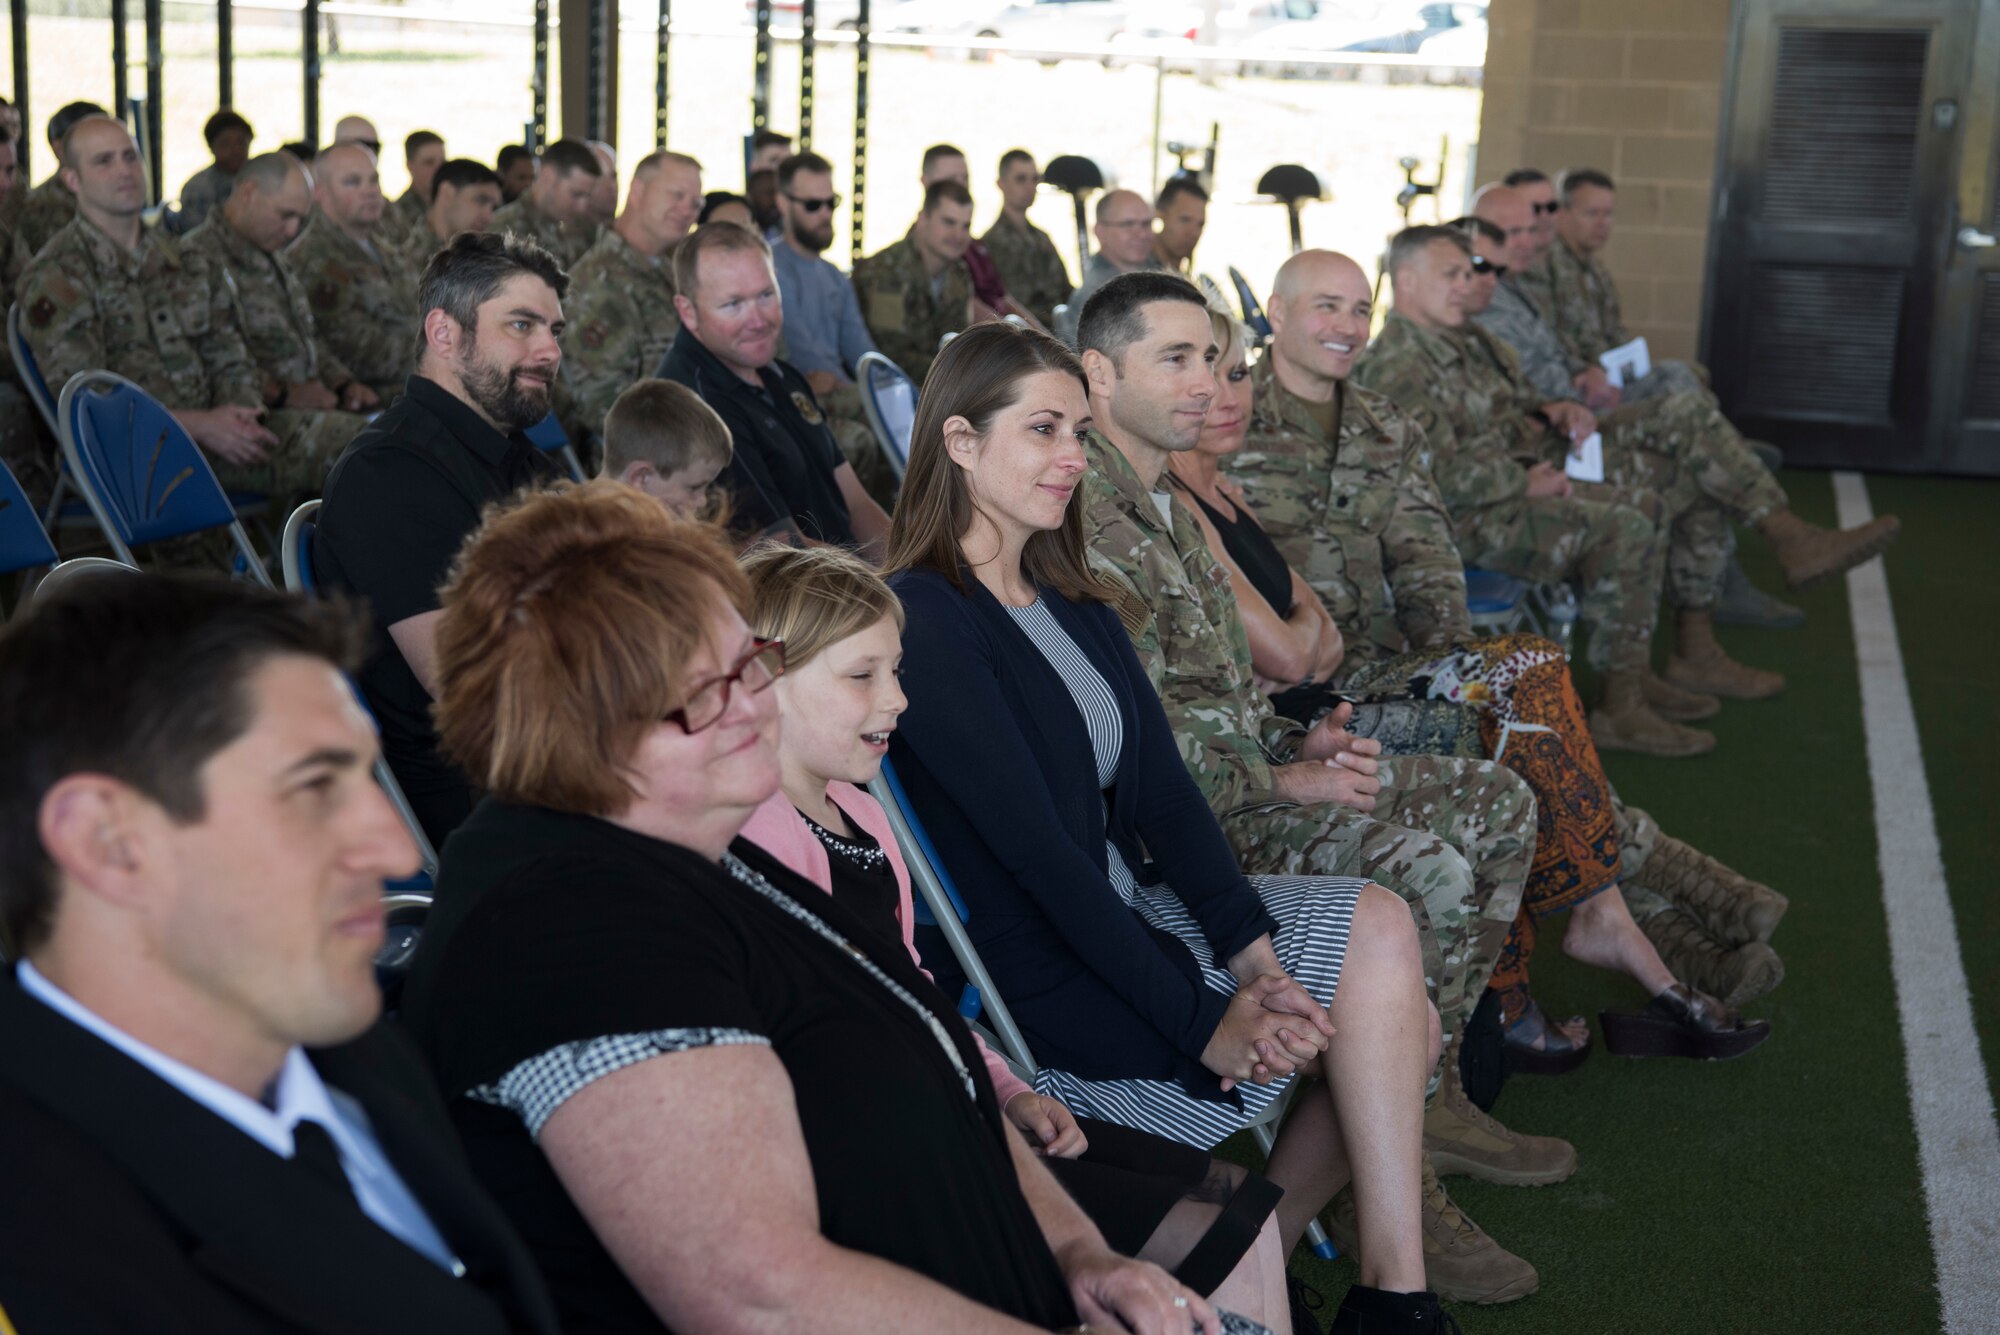 Family and friends of Senior Airman Bradley Smith, a Silver Star recipient, along with Special Tactic Airmen, both current and those still in training, attend a dedication ceremony in his honor April 19 at Joint Base San Antonio-Lackland Medina Annex, Texas.